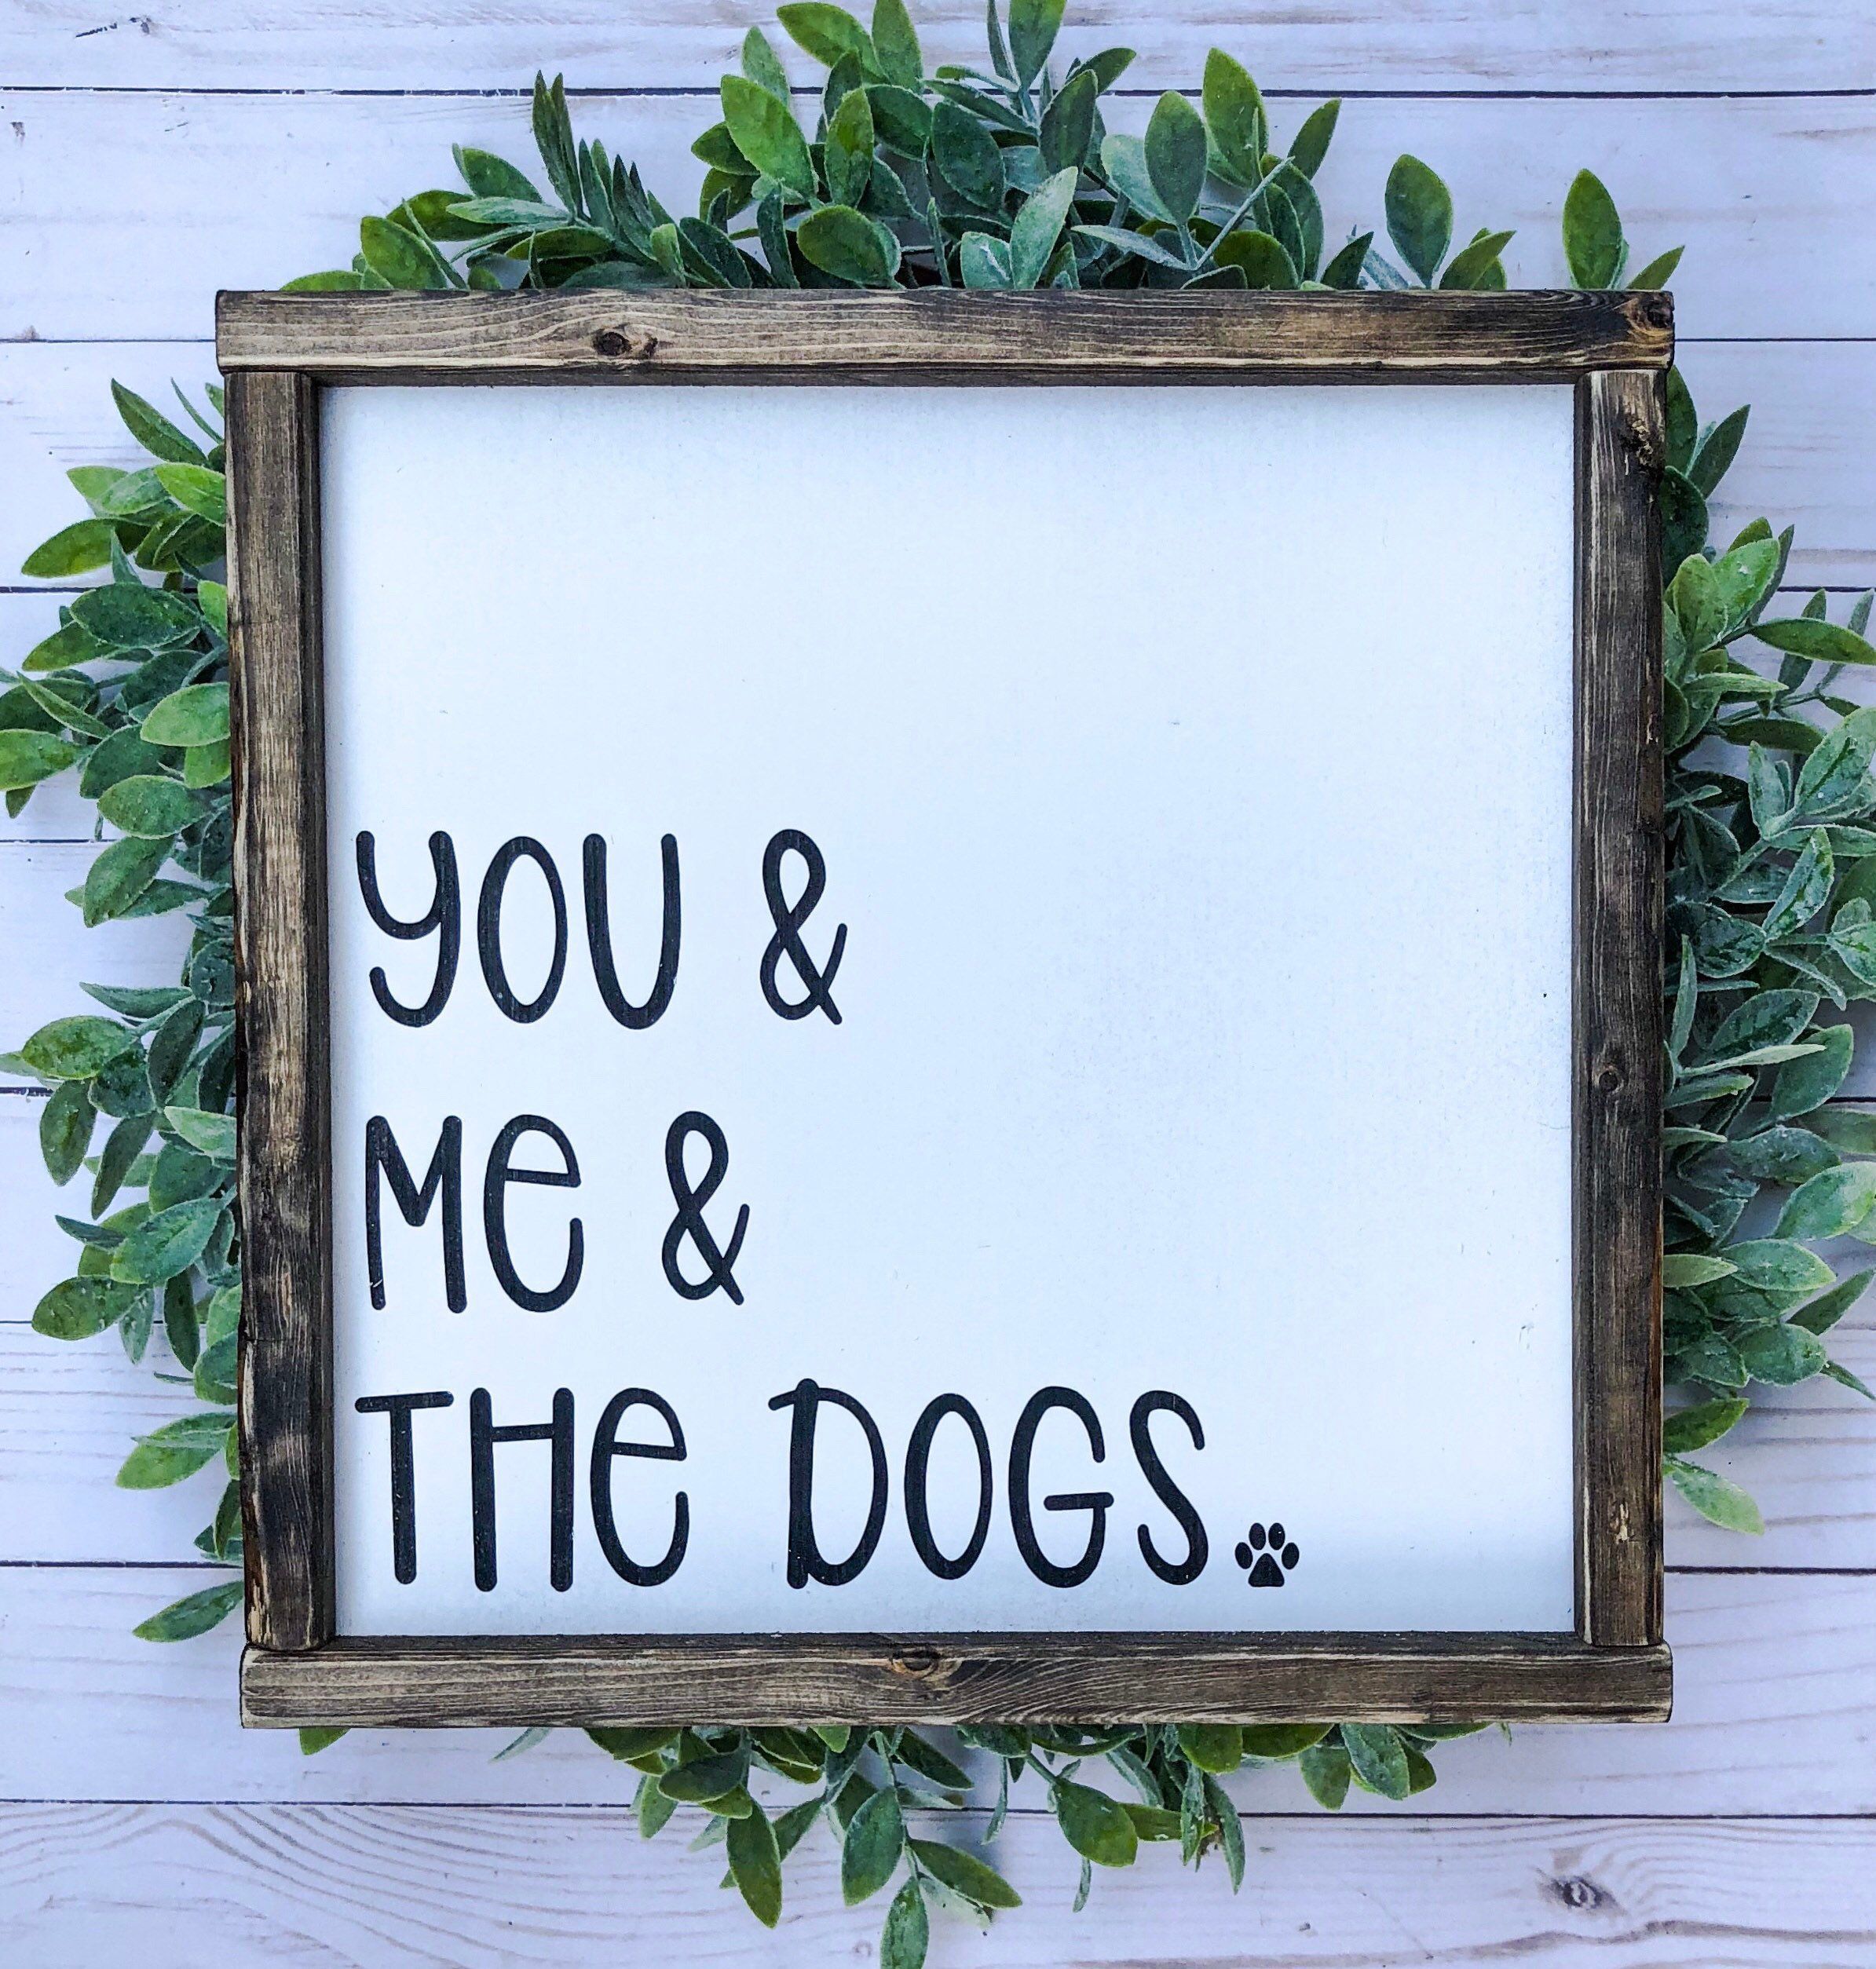 Signs | signs with quotes | wood signs | farmhouse sign | farmhouse decor | home decor | dogs | pets | rustic decor | rustic signs -   15 wood decor signs
 ideas